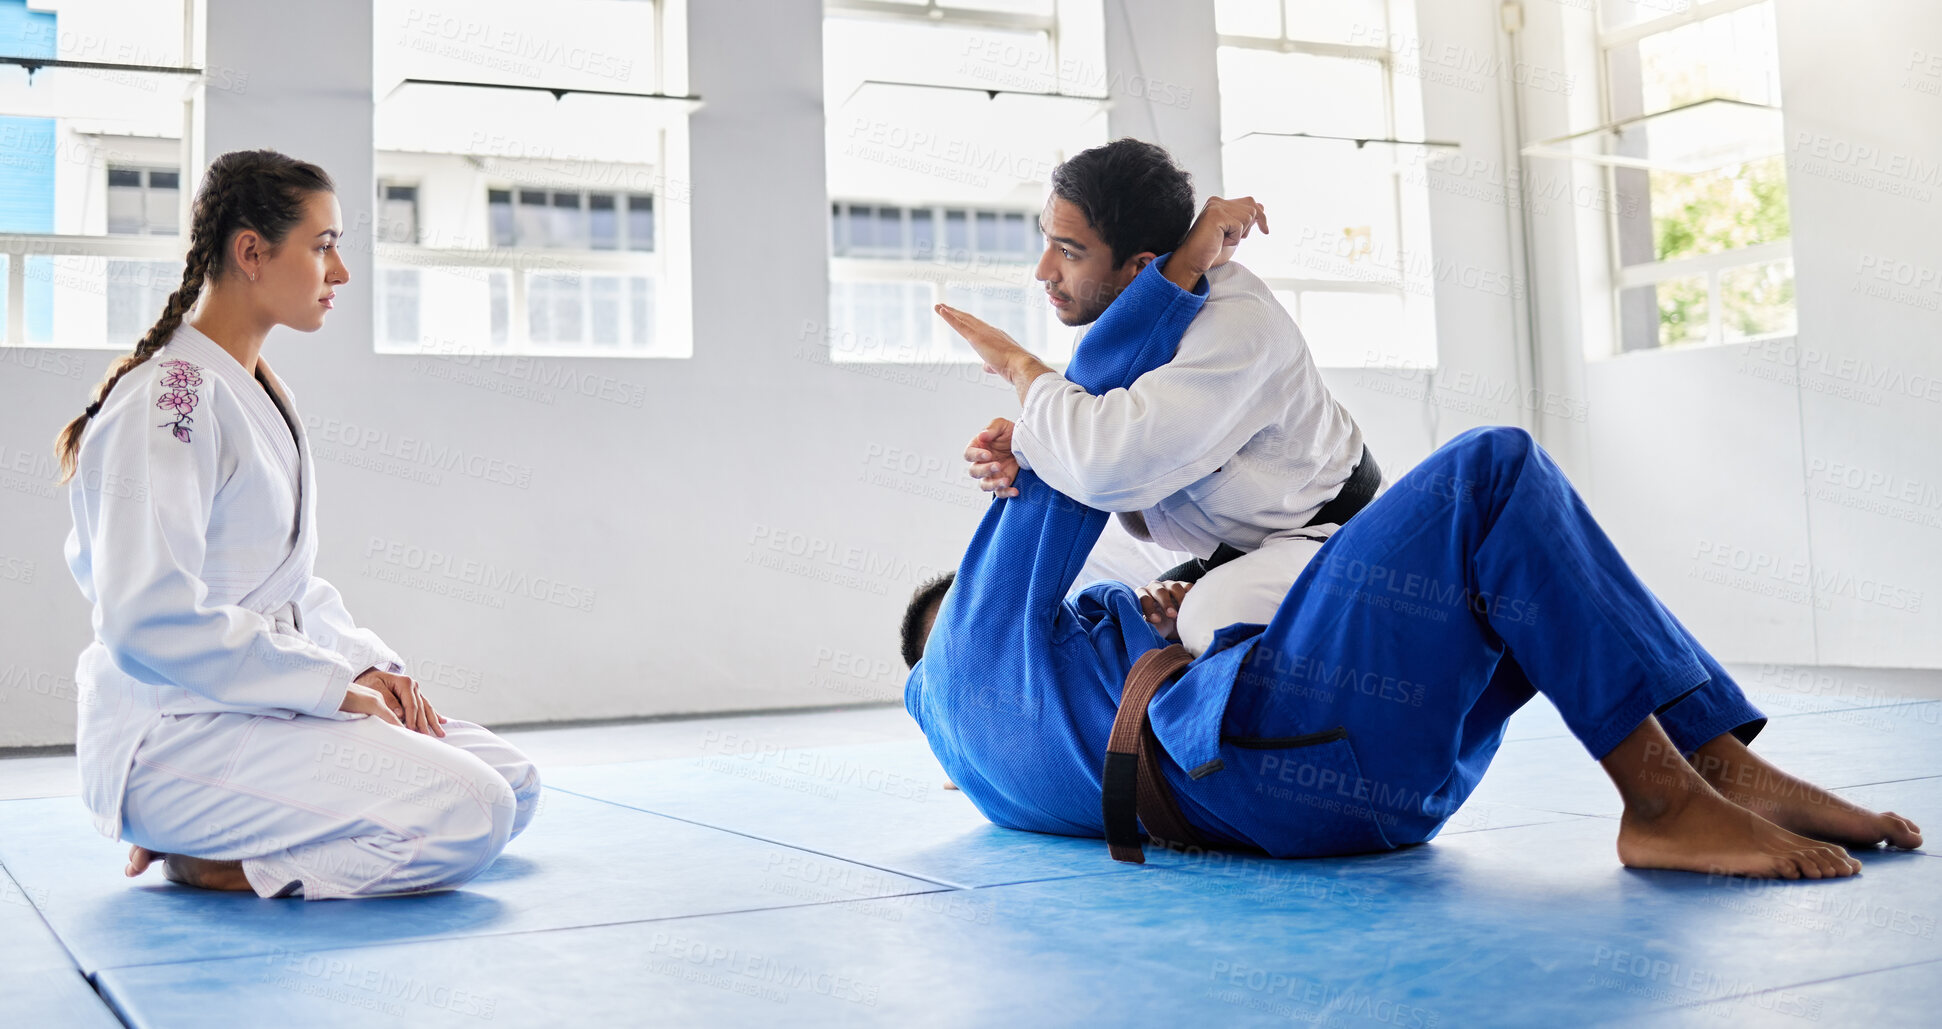 Buy stock photo Karate, fitness and student learning from a teacher in a fighting workout, mma training or combat exercise. Sports, education and martial arts expert instructor coaching or teaching a girl or woman